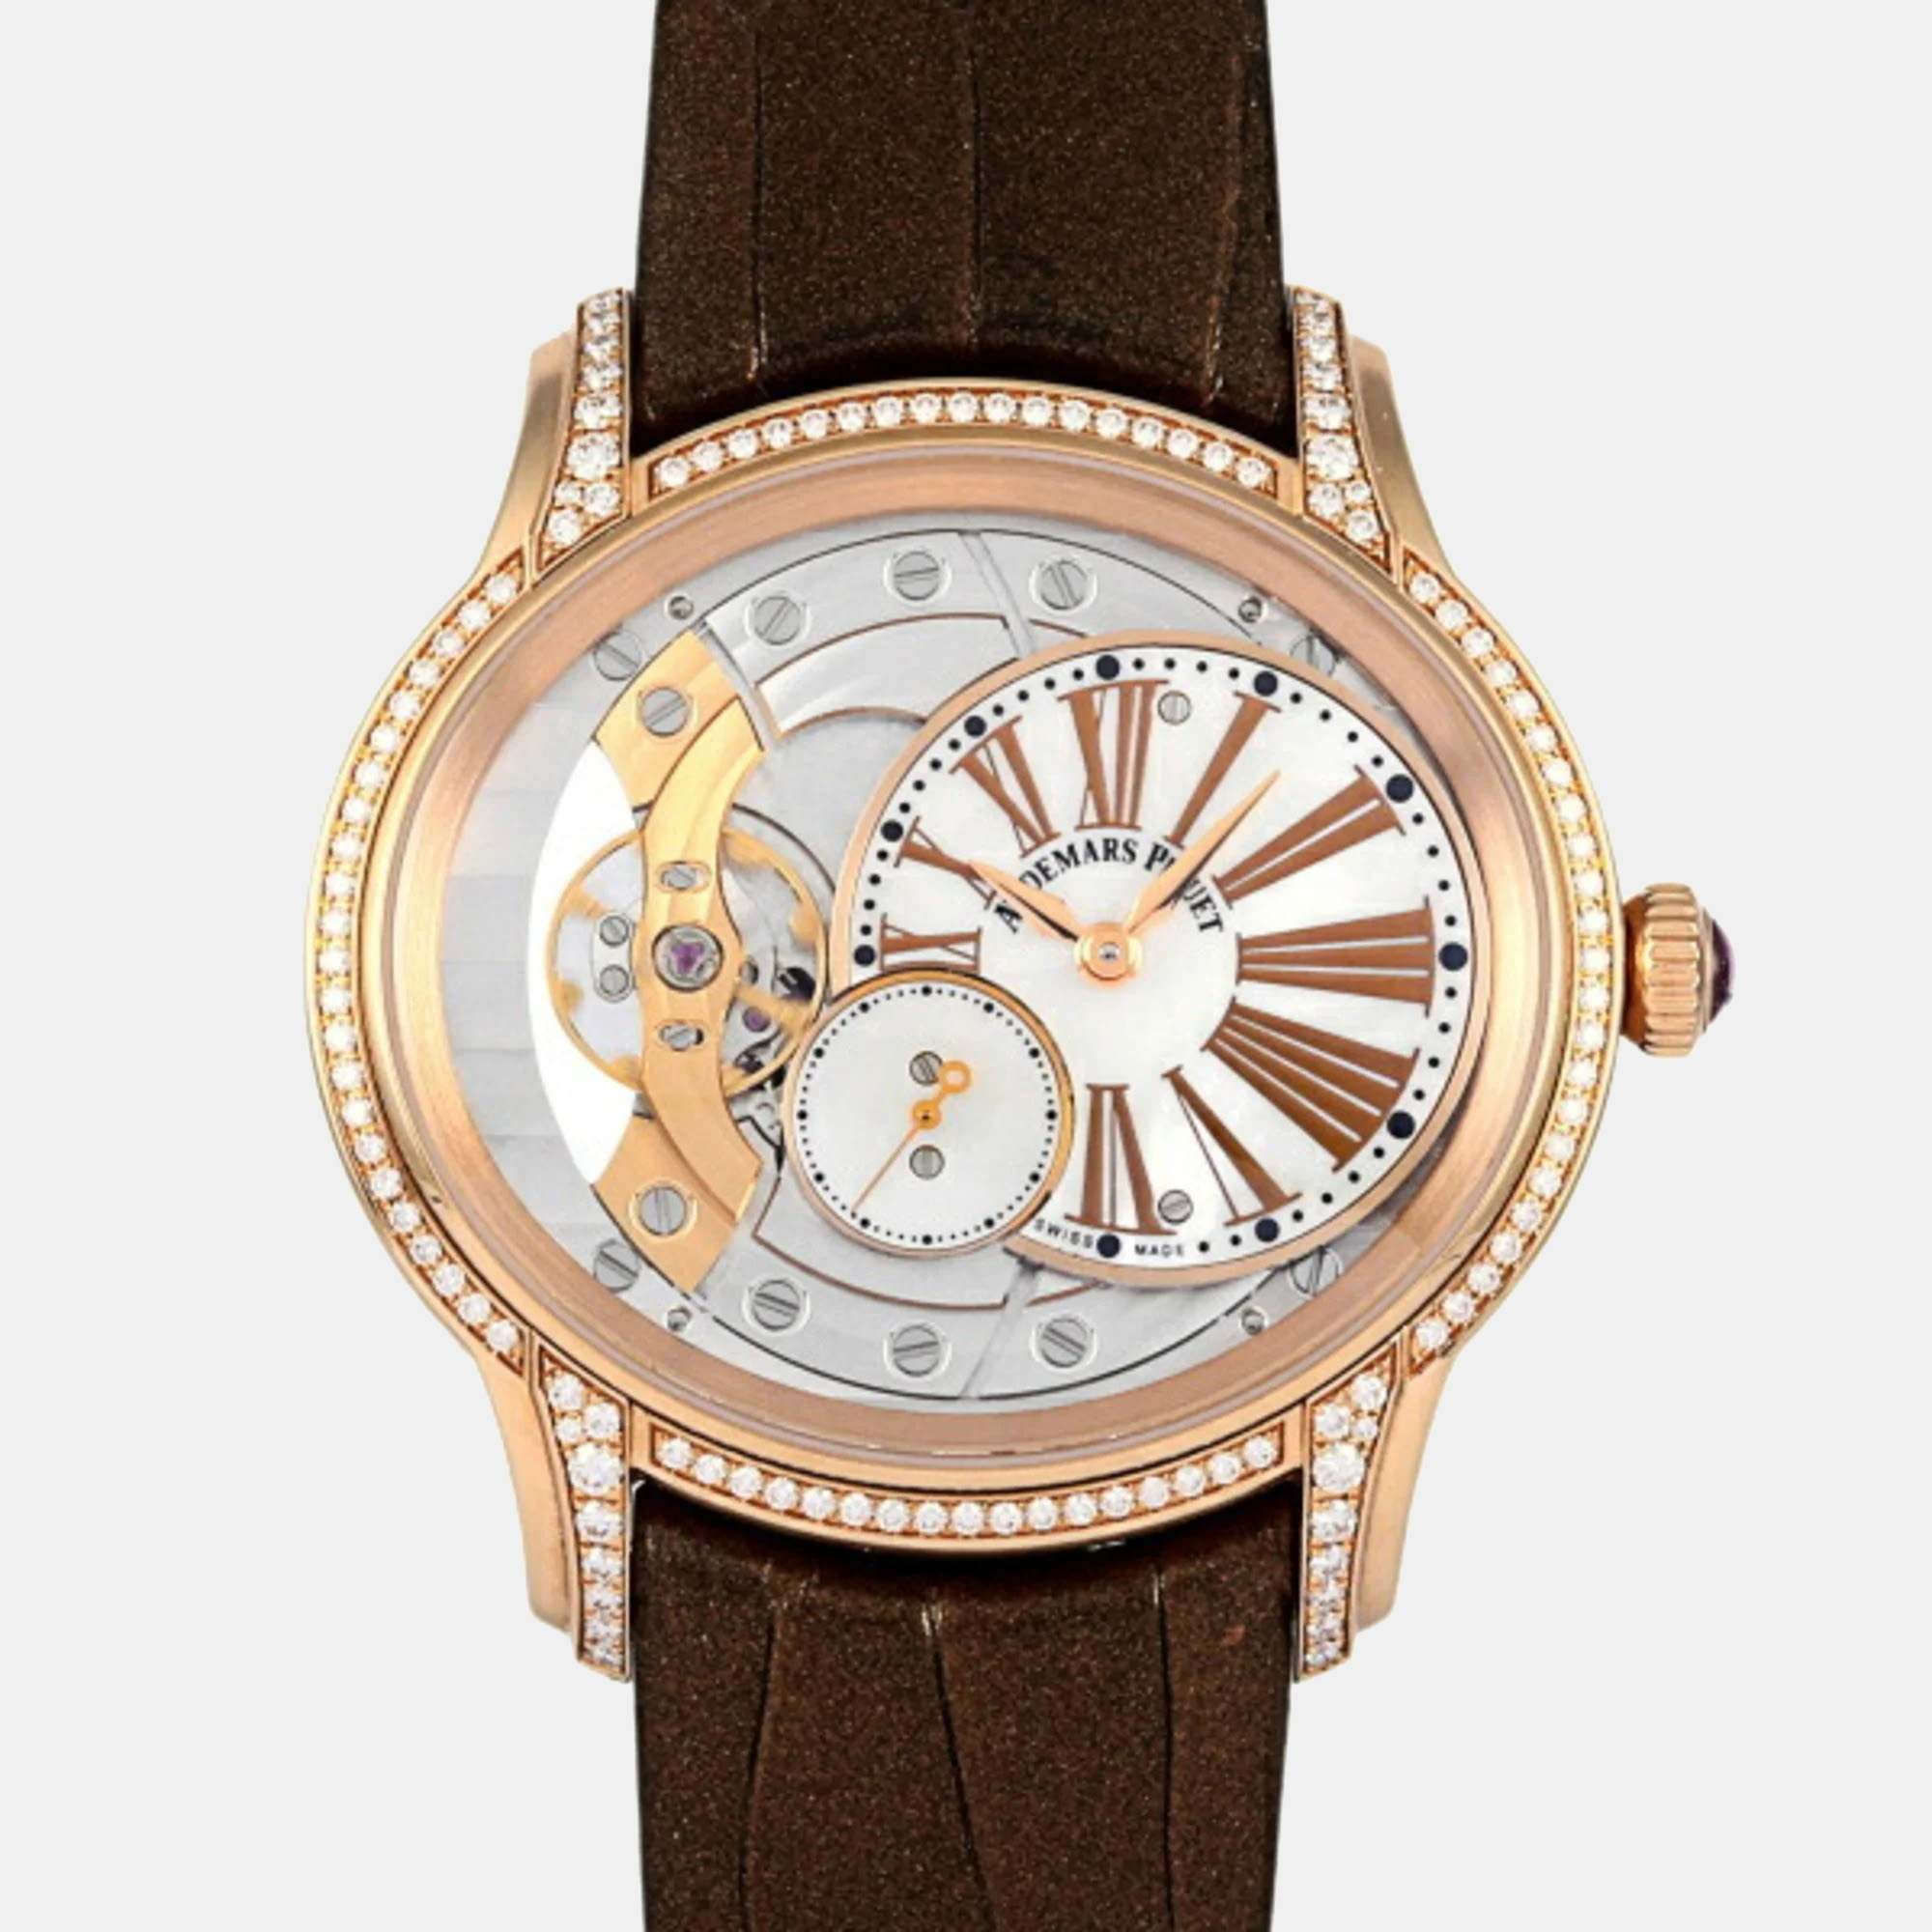 Audemars Piguet White Mother Of Pearl 18k Rose Gold Millenary 77247OR.ZZ.A812CR.01 Automatic Women's Wristwatch 35.4 Mm